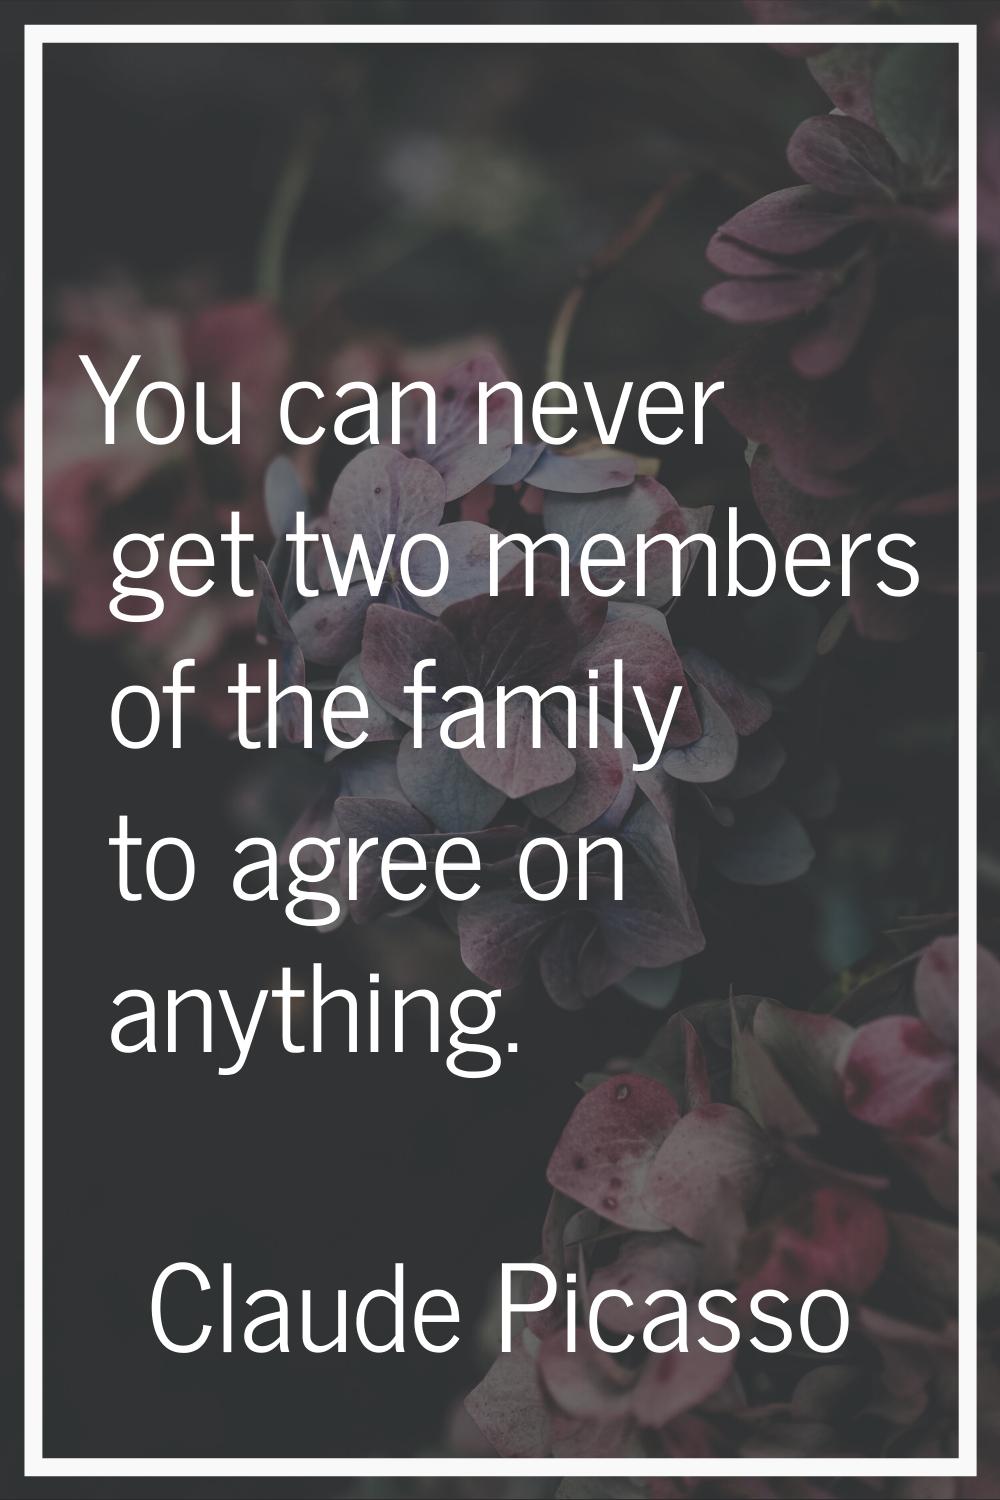 You can never get two members of the family to agree on anything.